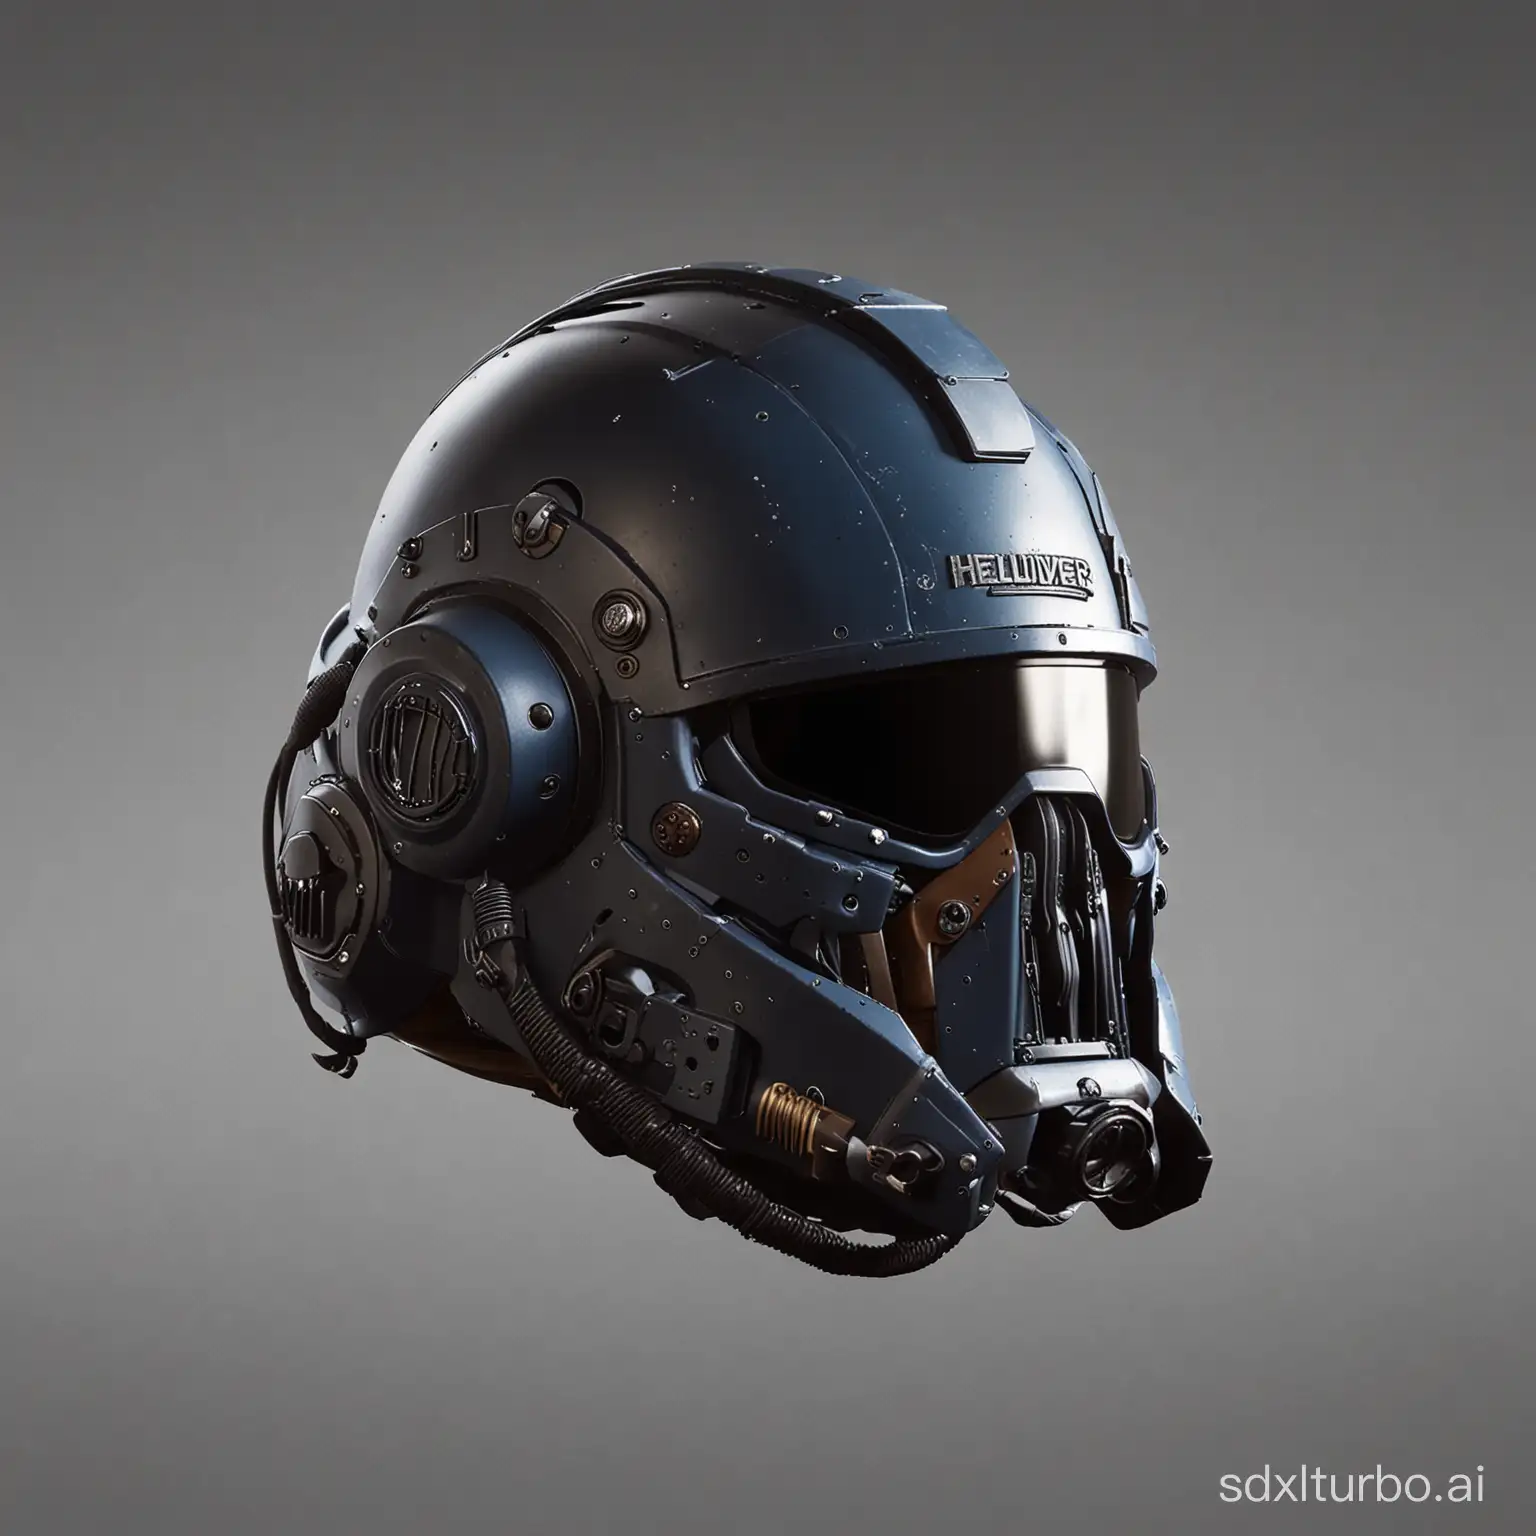 A helmet from a helldiver from Helldiver 2 on the Playstation 5